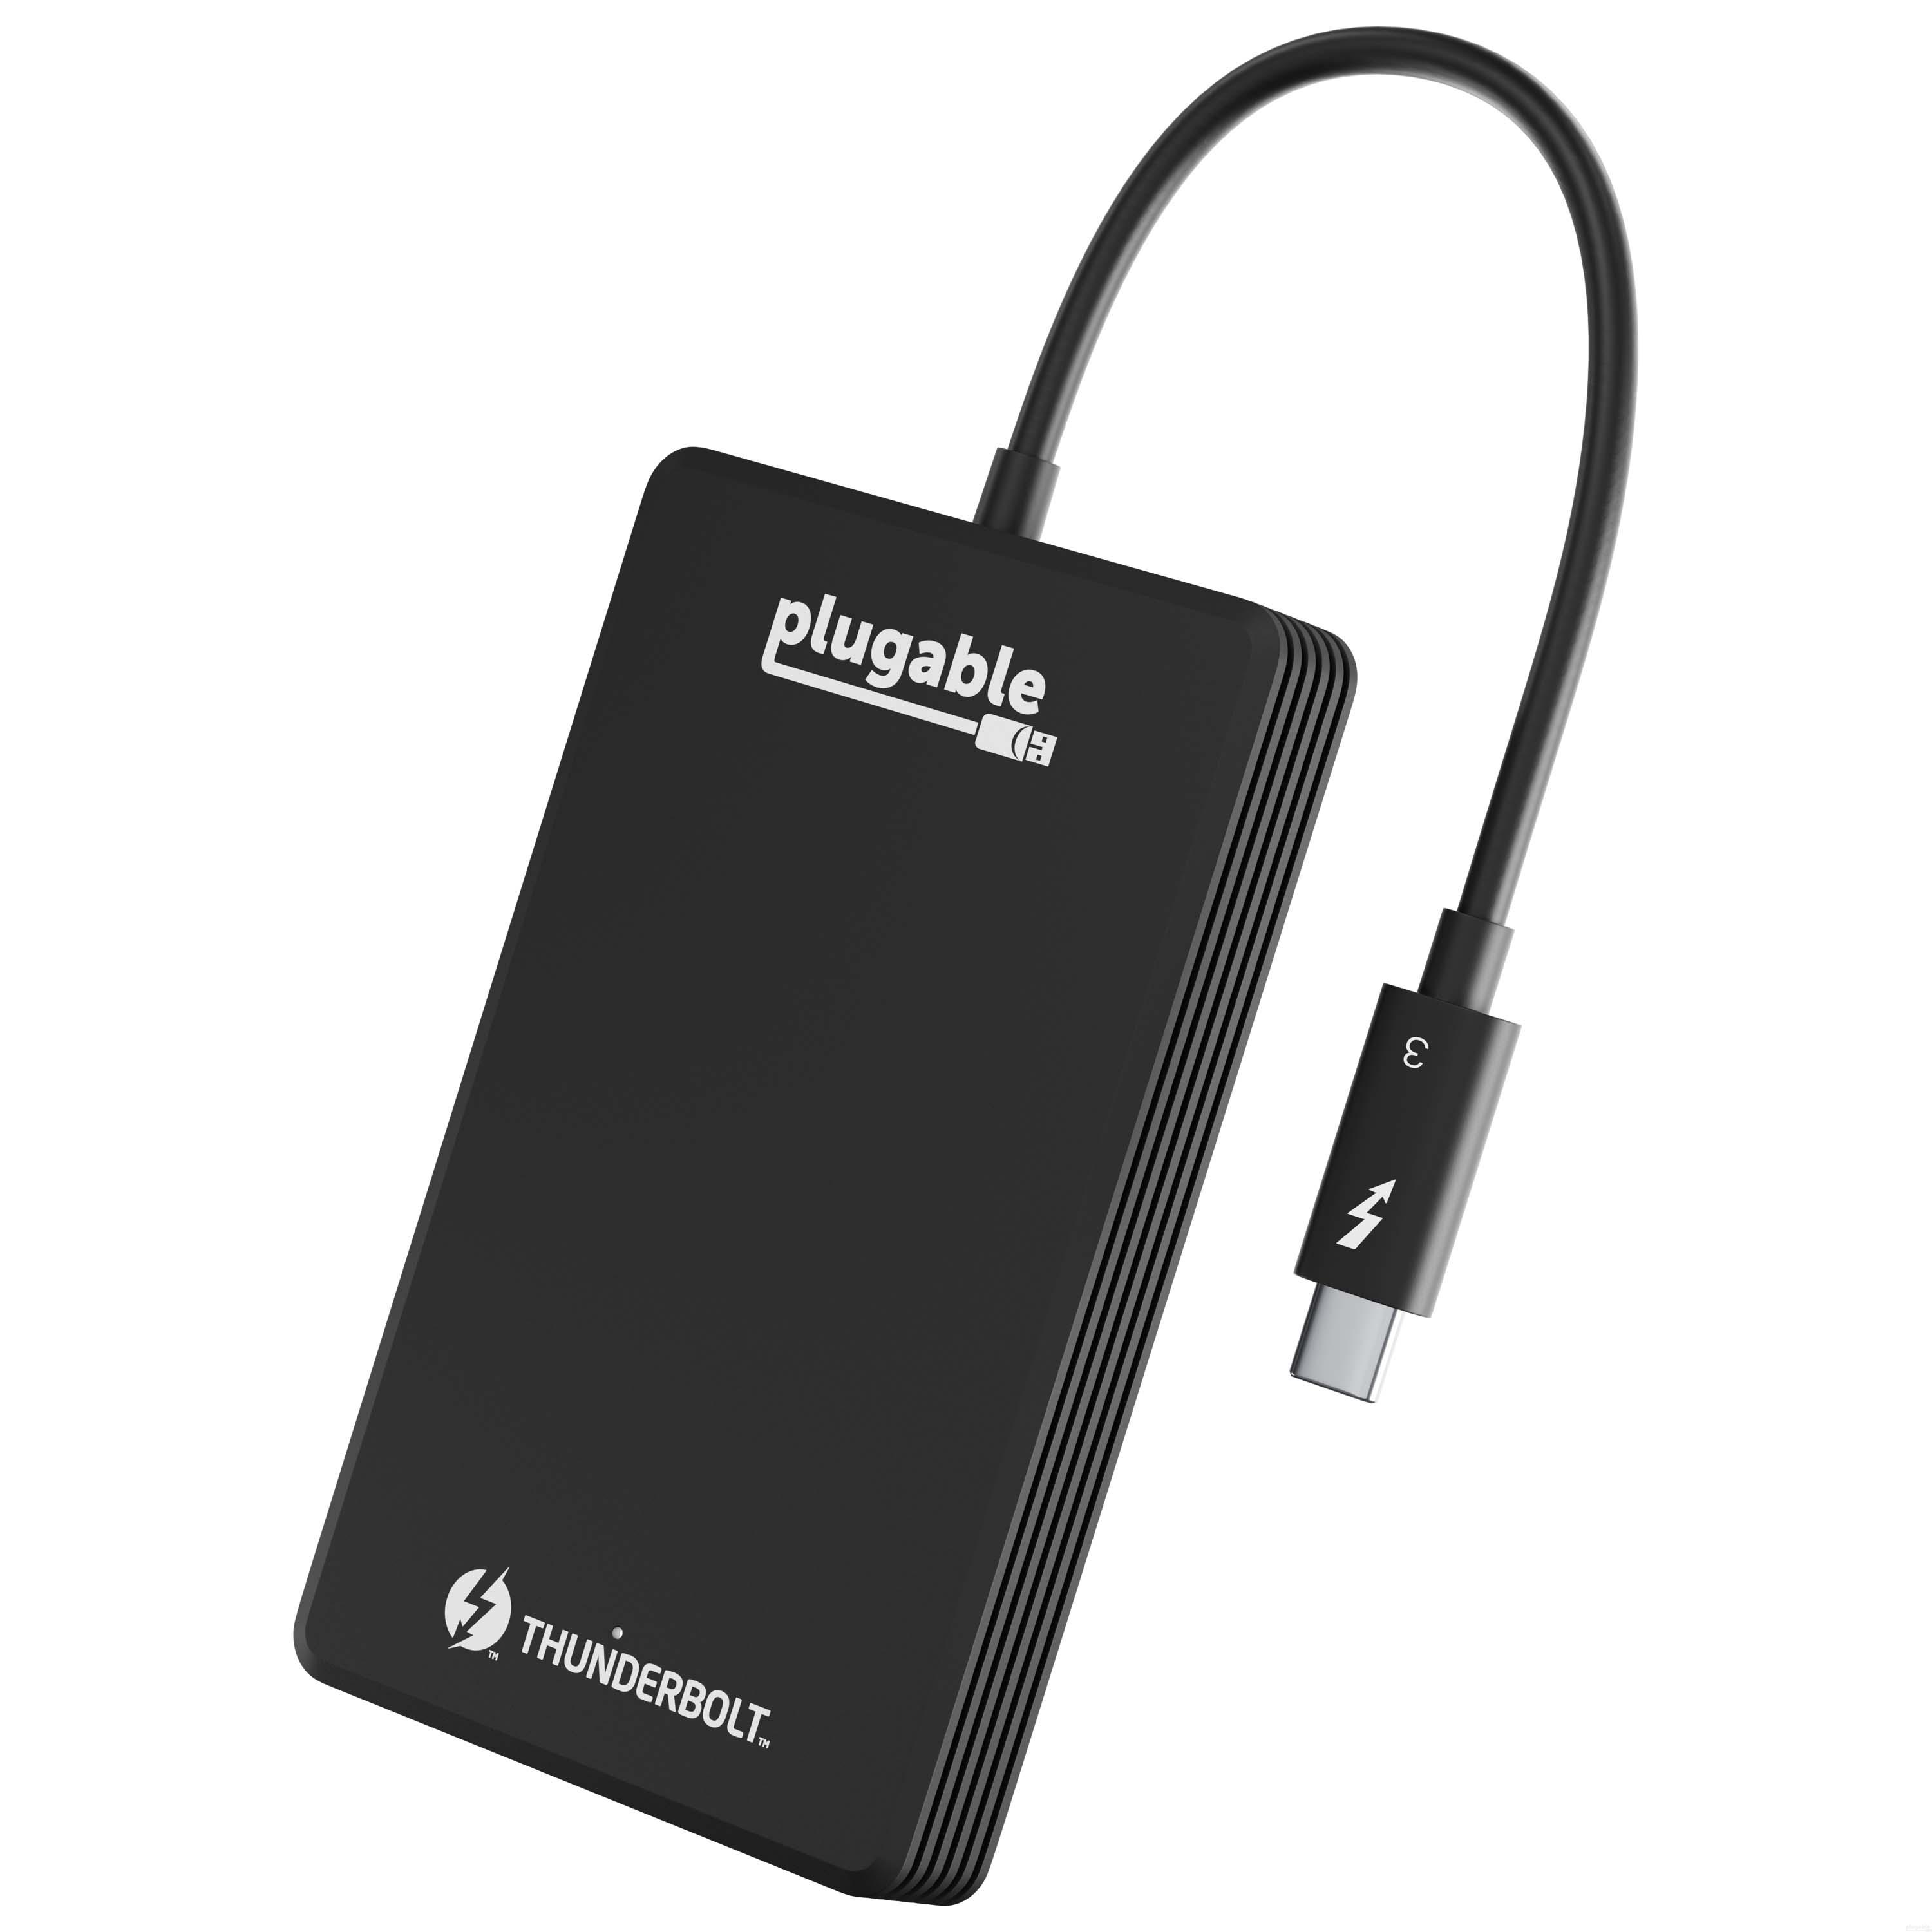 Plugable 2TB Thunderbolt 3 External SSD NVMe Drive (Up to 2400MBs/1800MBs R/W) - image 1 of 9